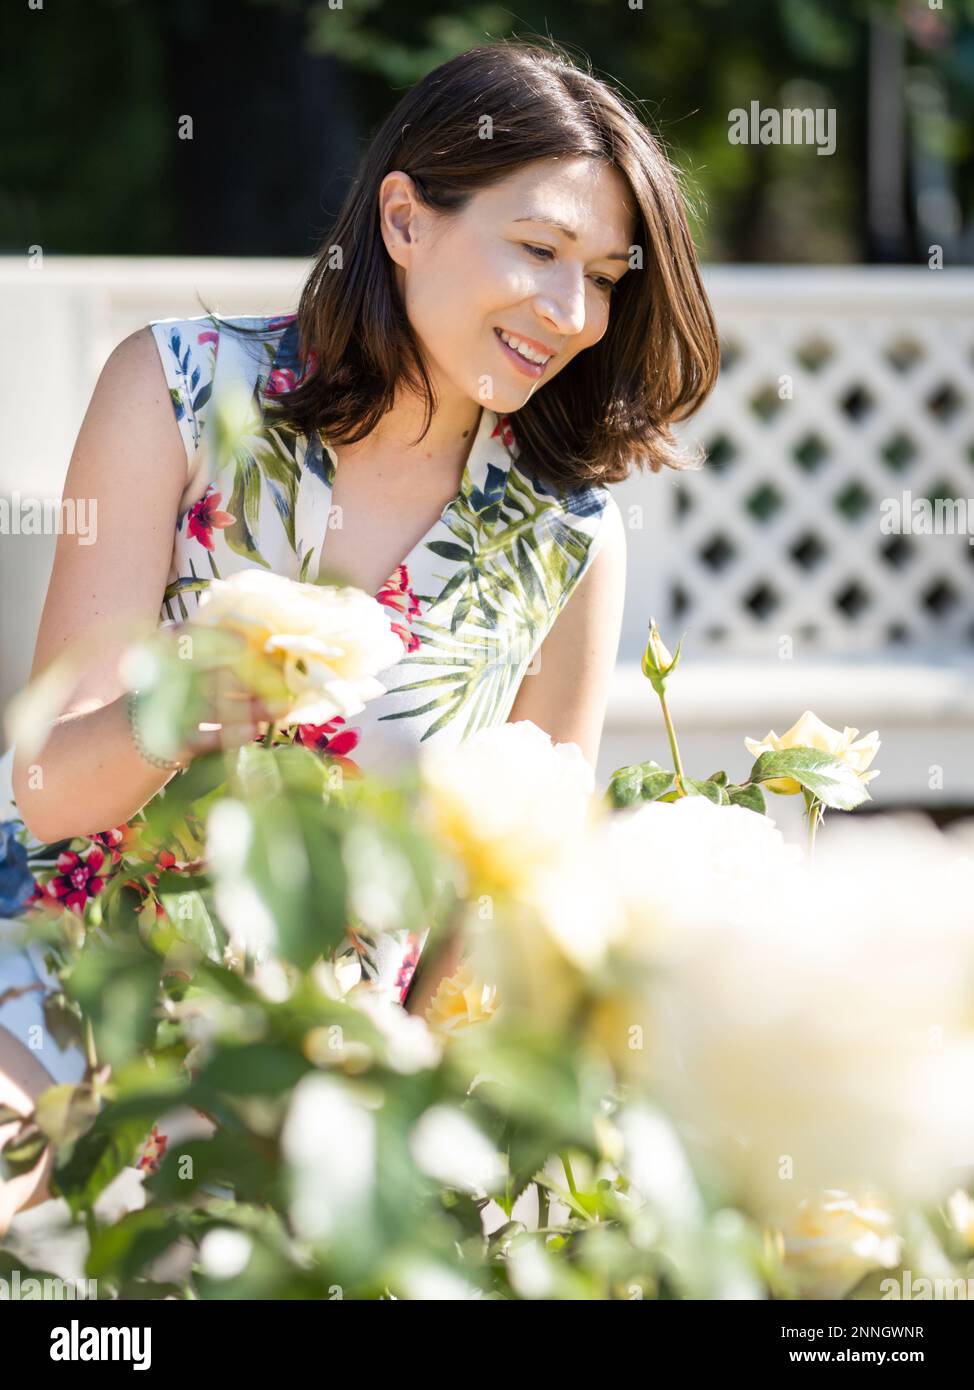 Woman is admiring of blooming roses in public park. Summer vibes. Tropical plants and flowers in bloom in garden. Floriculture as hobby. Stock Photo